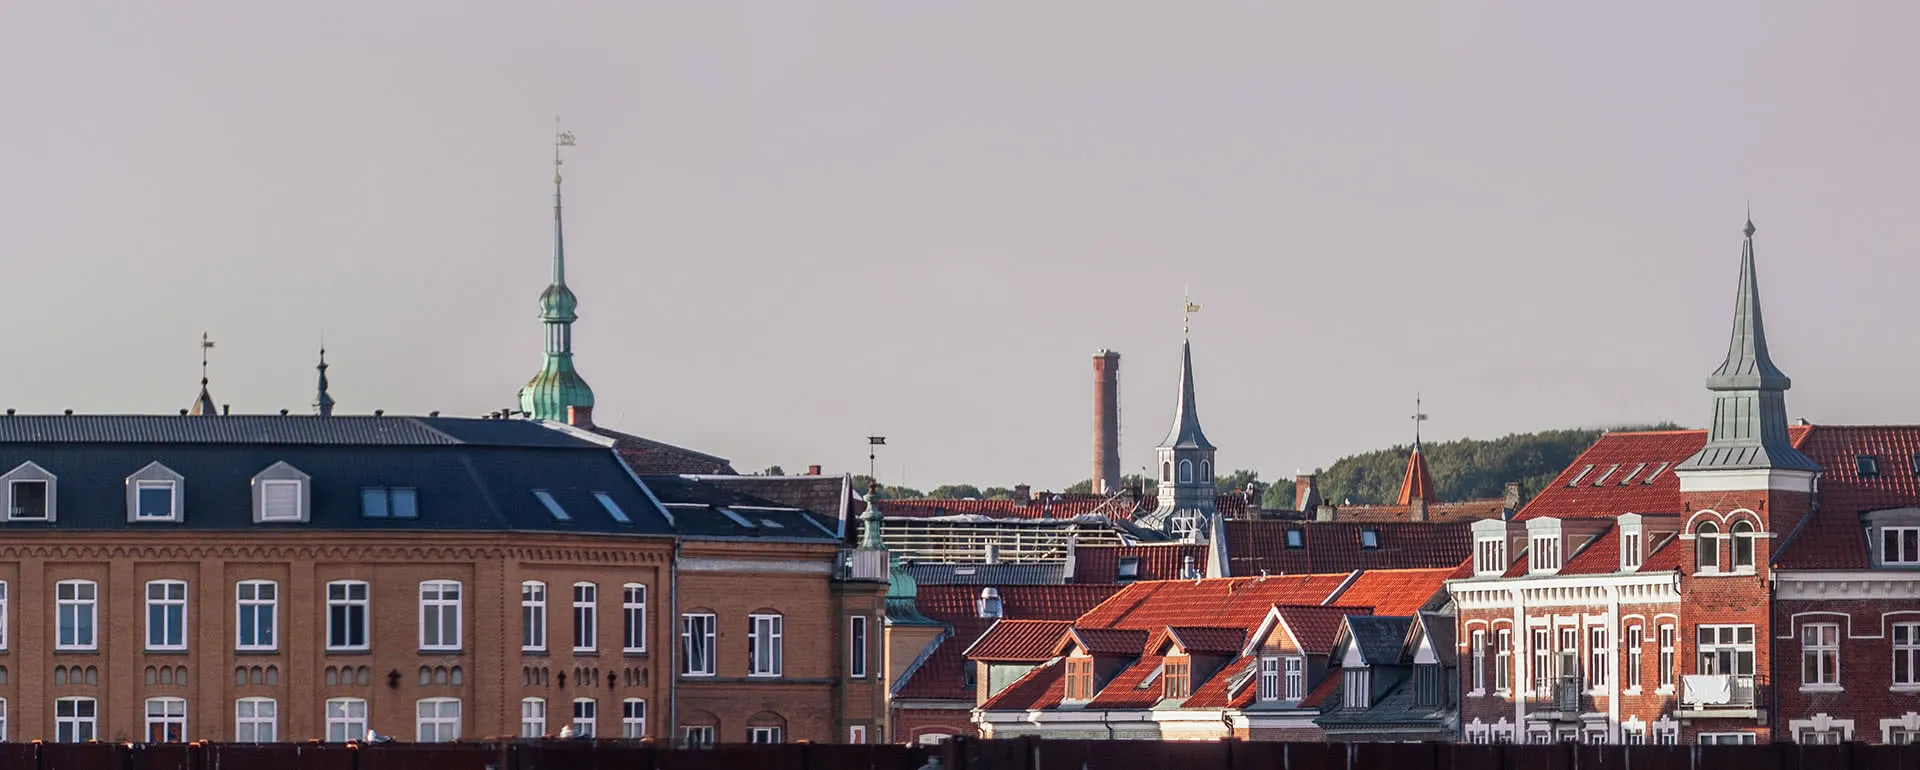 Aalborg - the destination with youth hostels